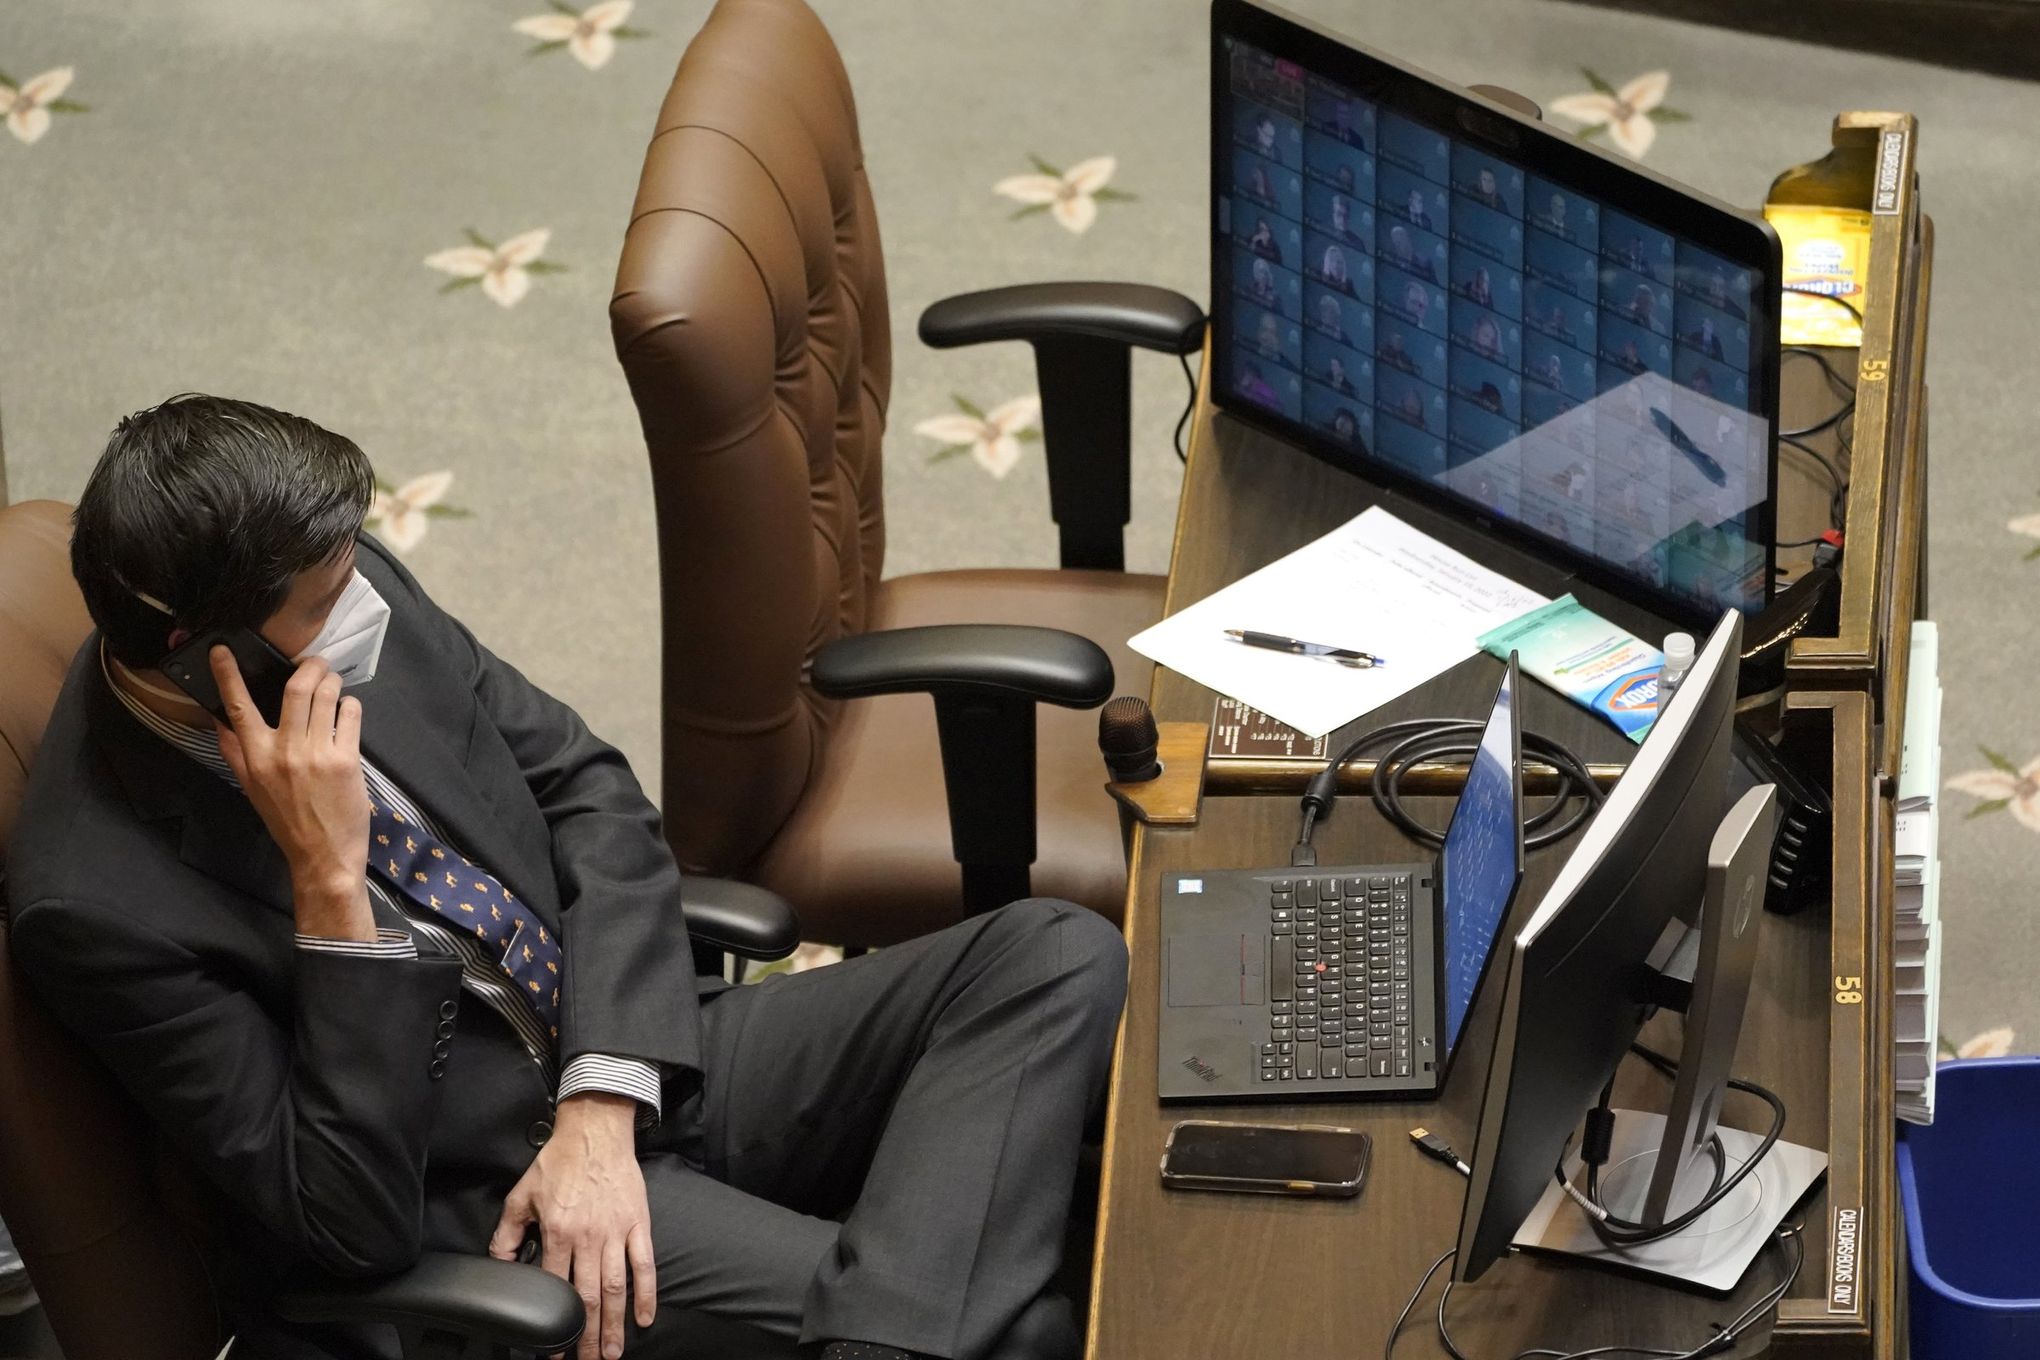 State Rep. Alex Ramel sitting at a desk on the phone in the House